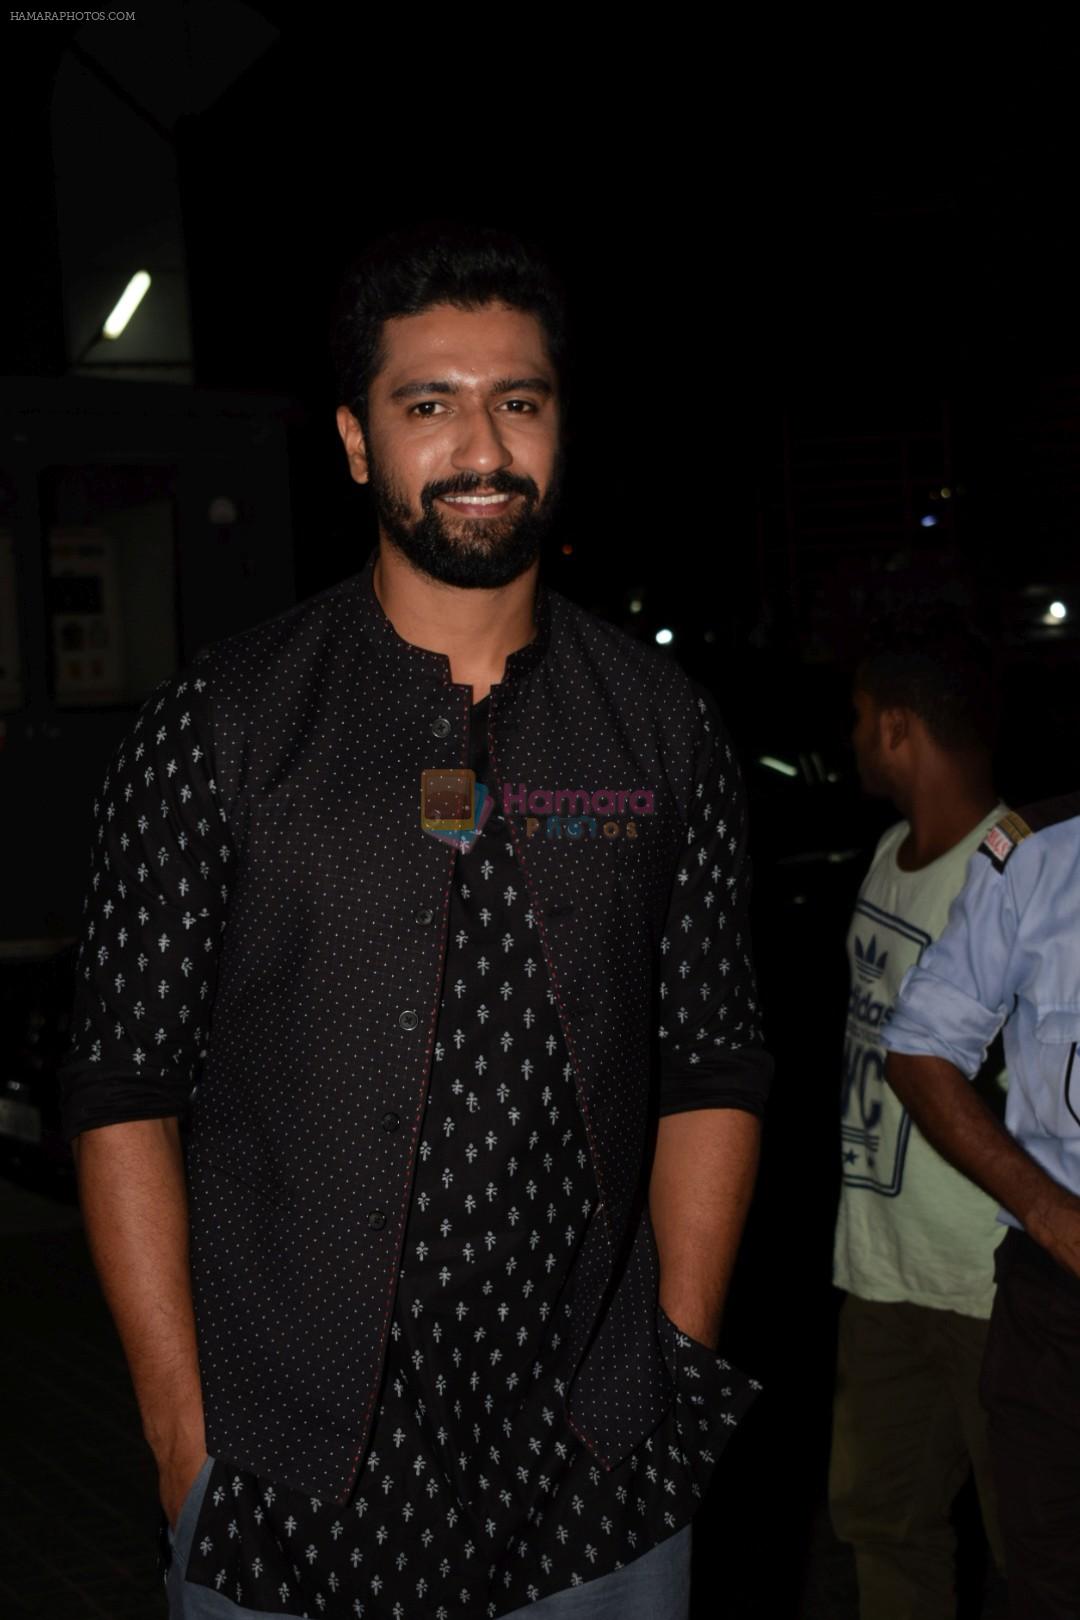 Vicky Kaushal at the Screening of film Raazi in pvr, juhu on 6th May 2018